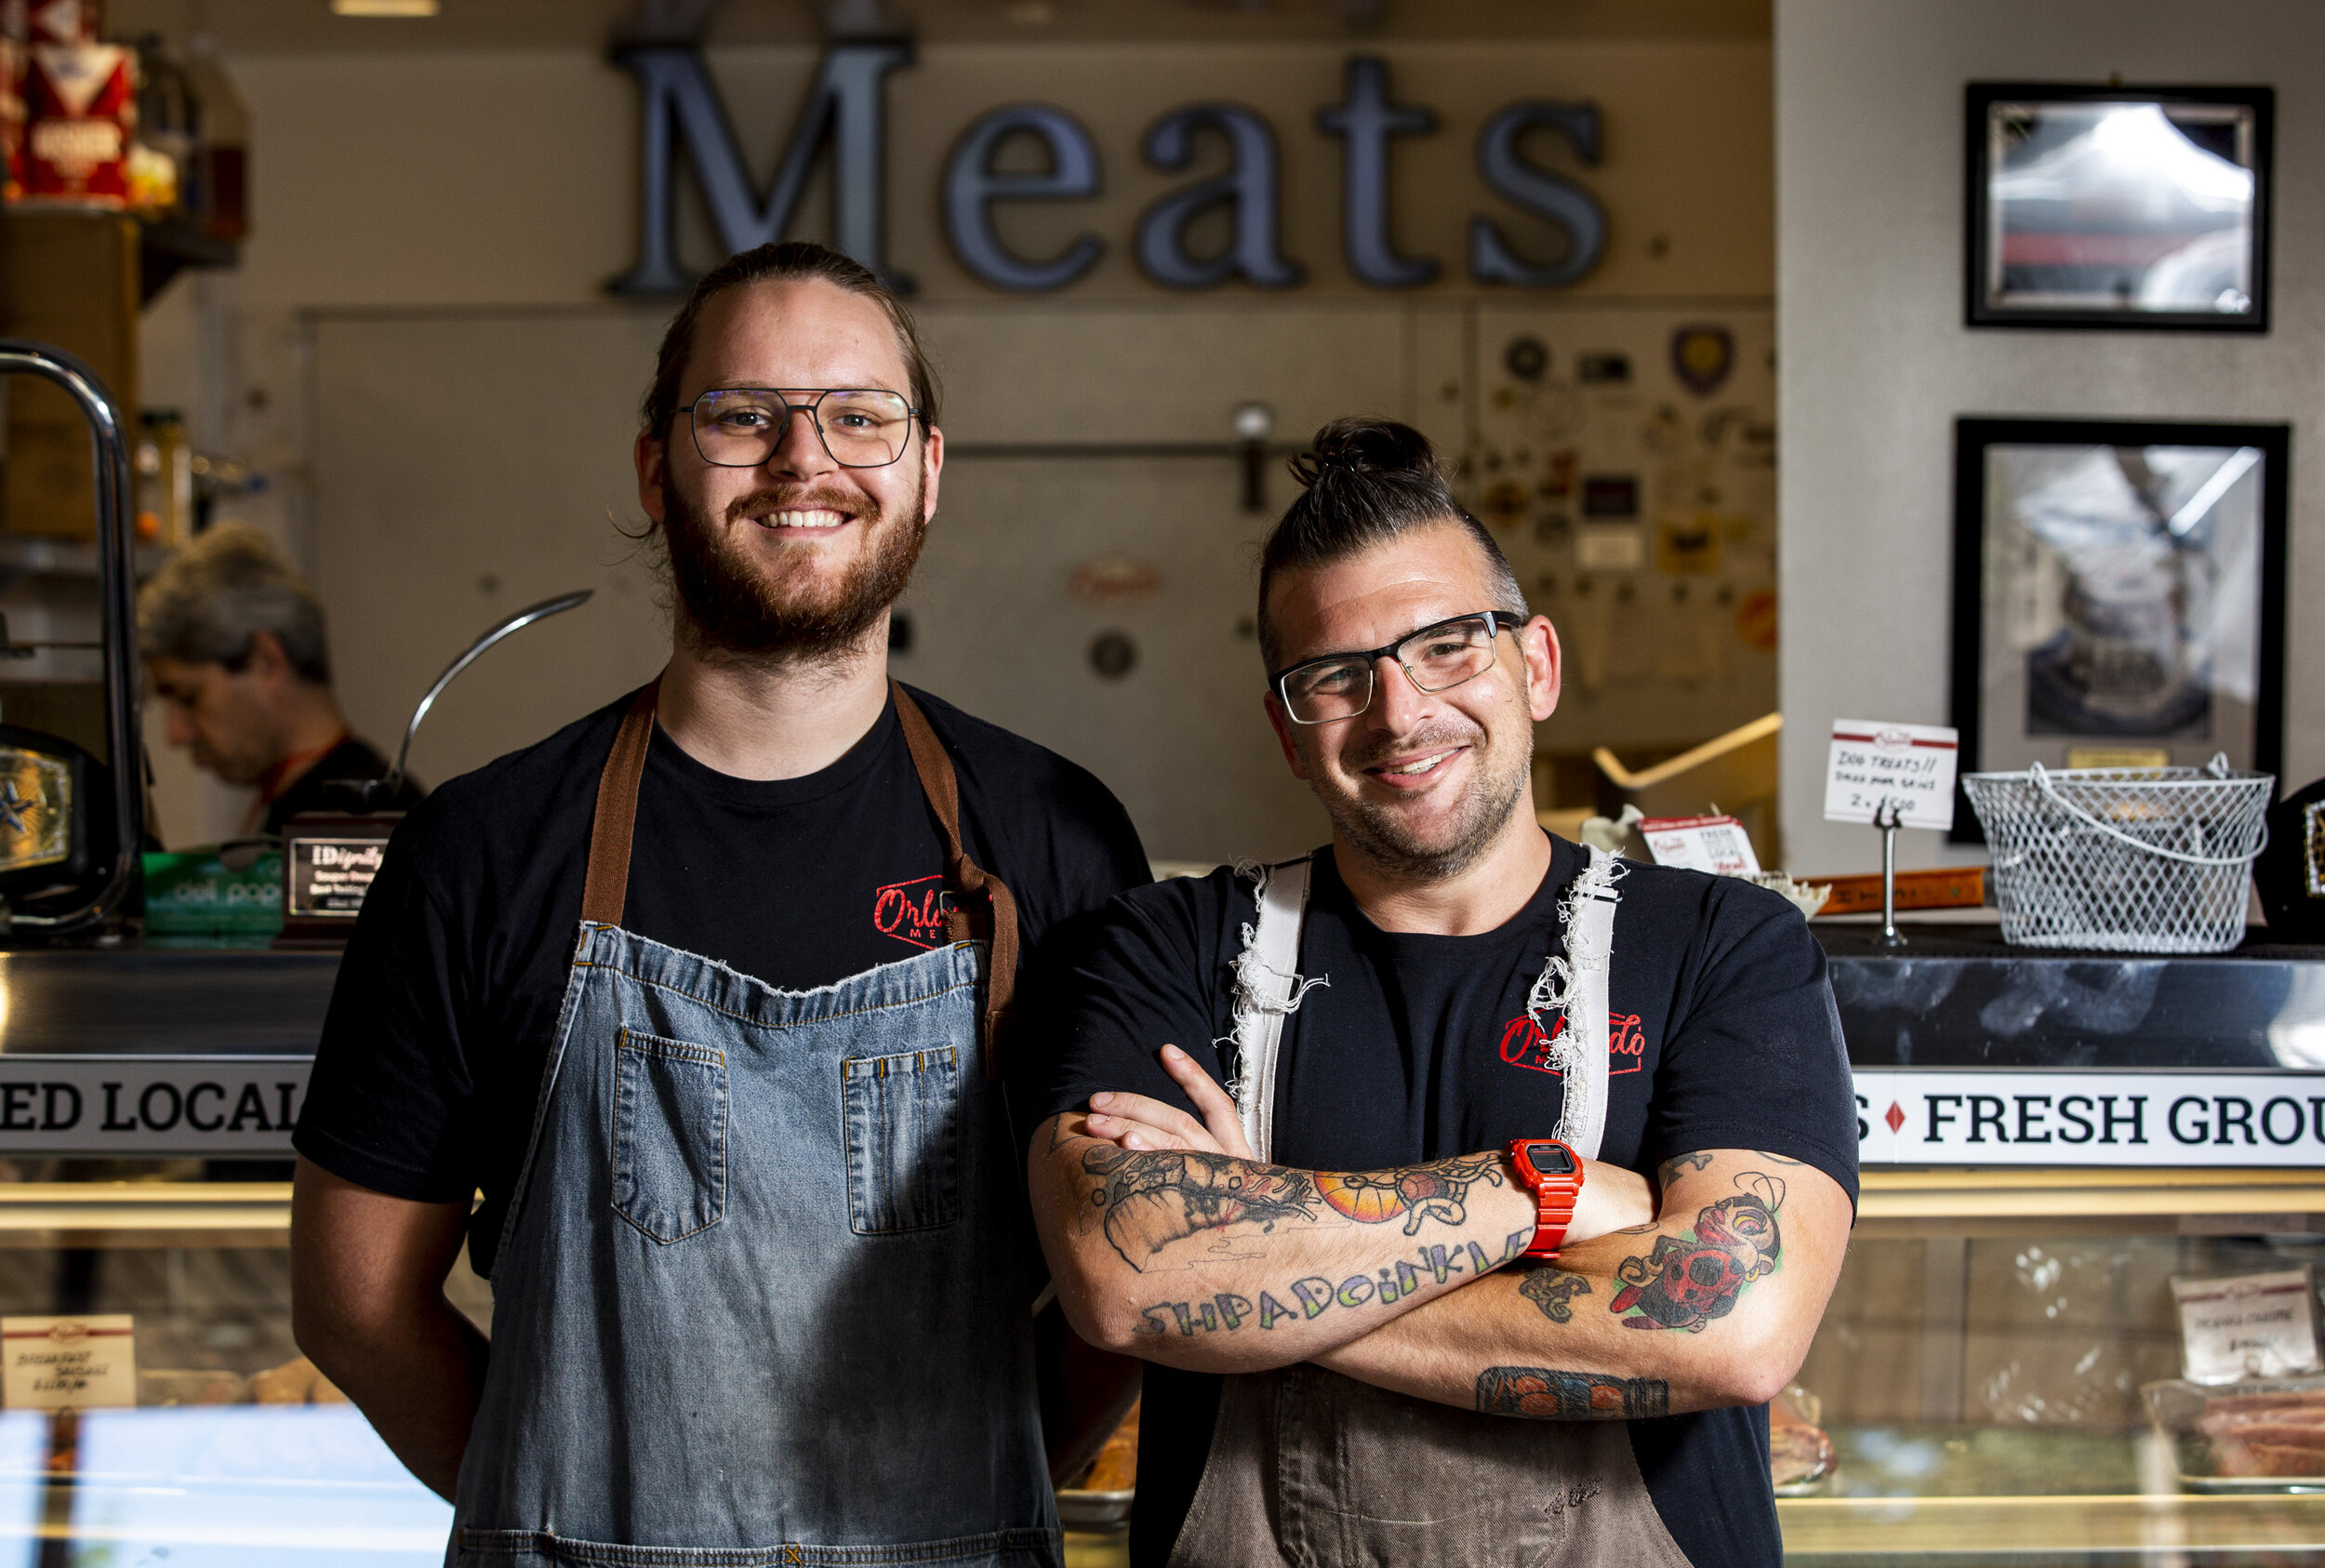  Eliot Hillis, culinary director and owner of Orlando Meats, right, said, "We're a treat, just like every other restaurant is a treat to just go out and have something to do that's not inside the house. I think people relish the freedom a little bit 